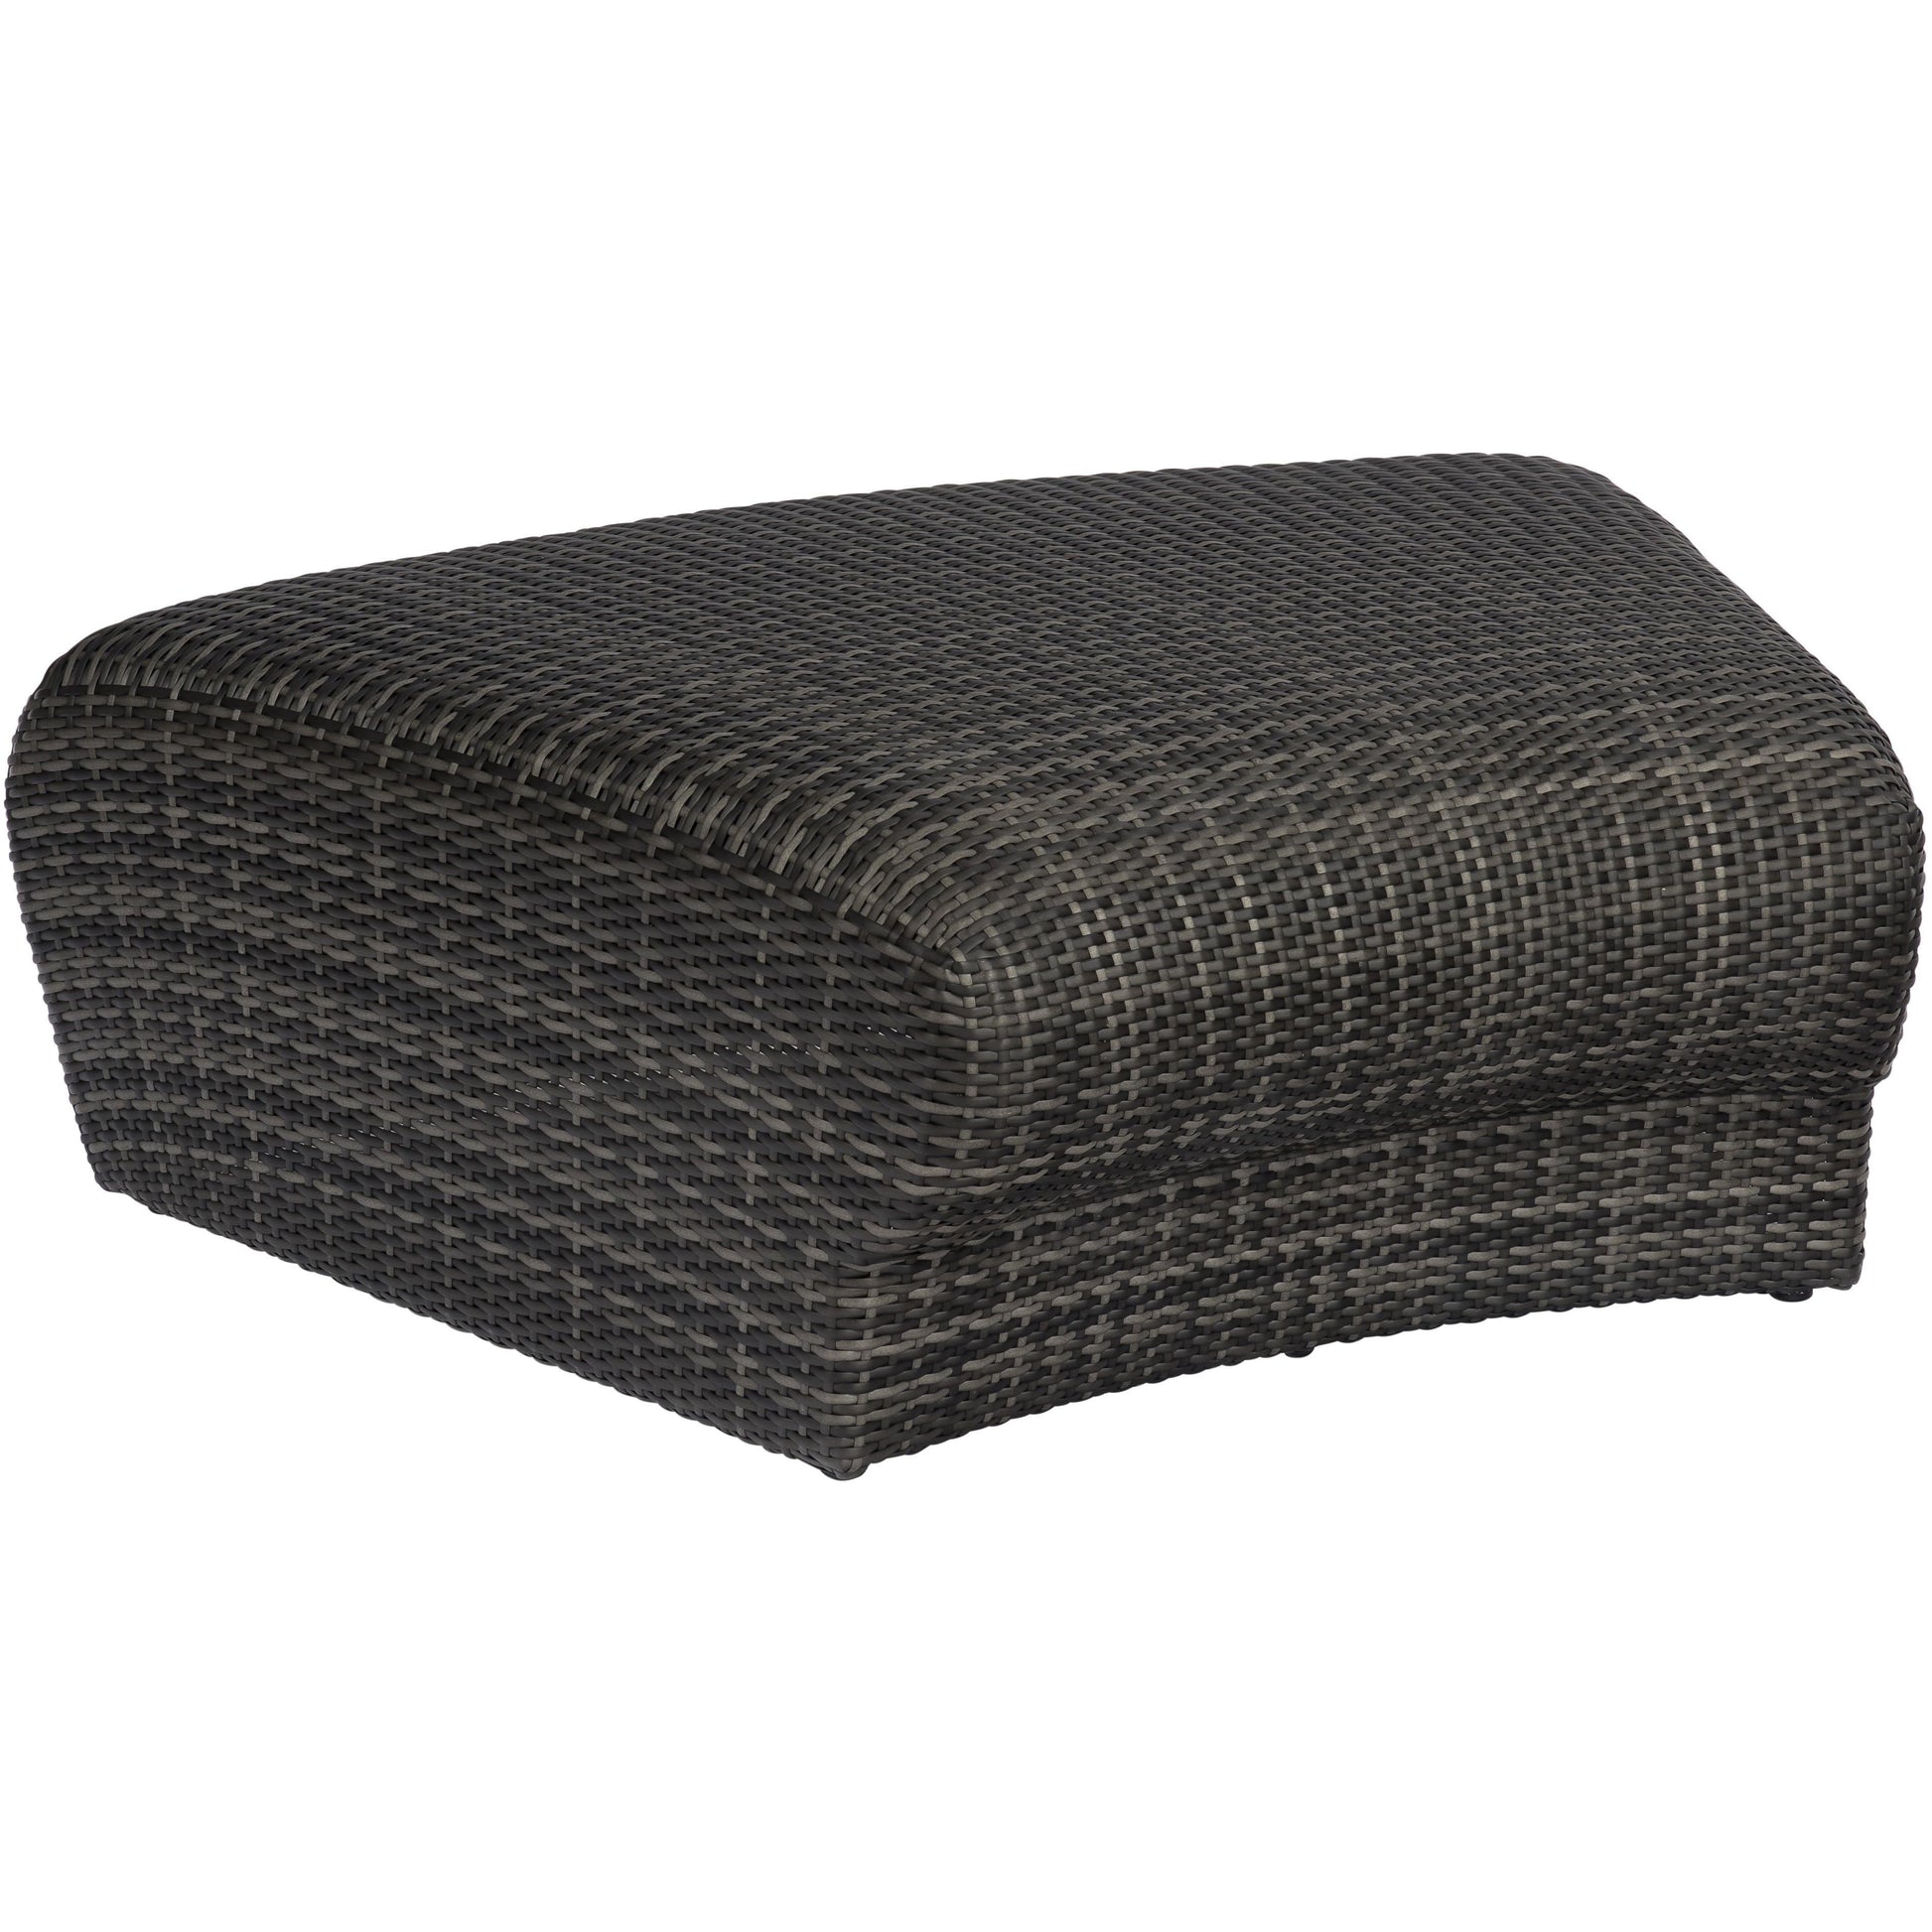 Backless Bench/Ottoman S504085 Woodard Outdoor Patio Genie | Canaveral Collection Seating Woodard 